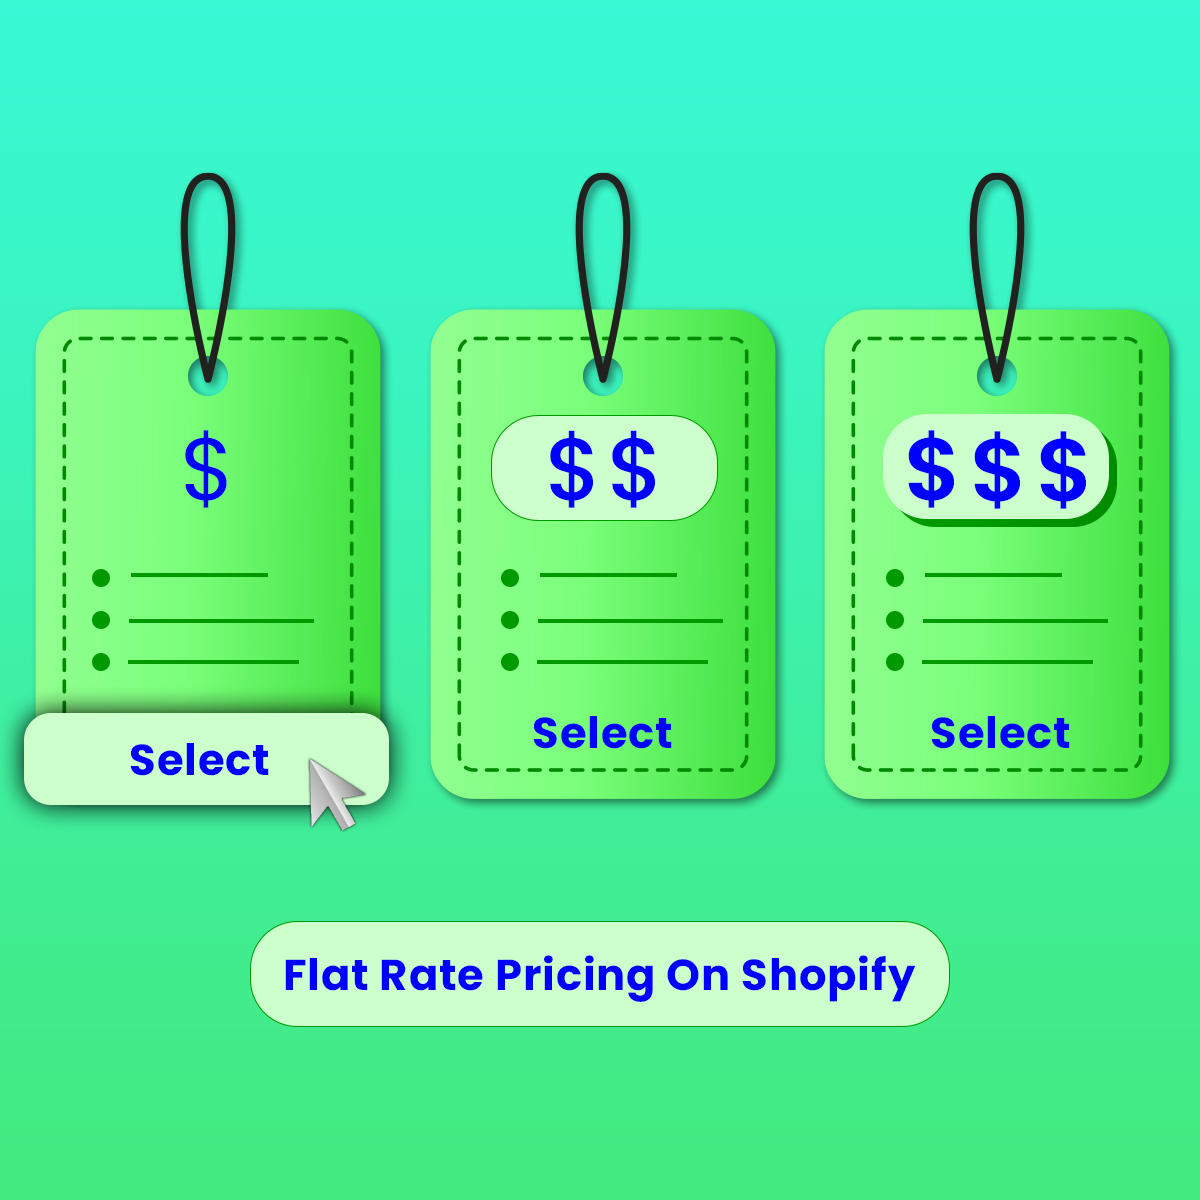 How To Do Flat Rate Pricing On Shopify